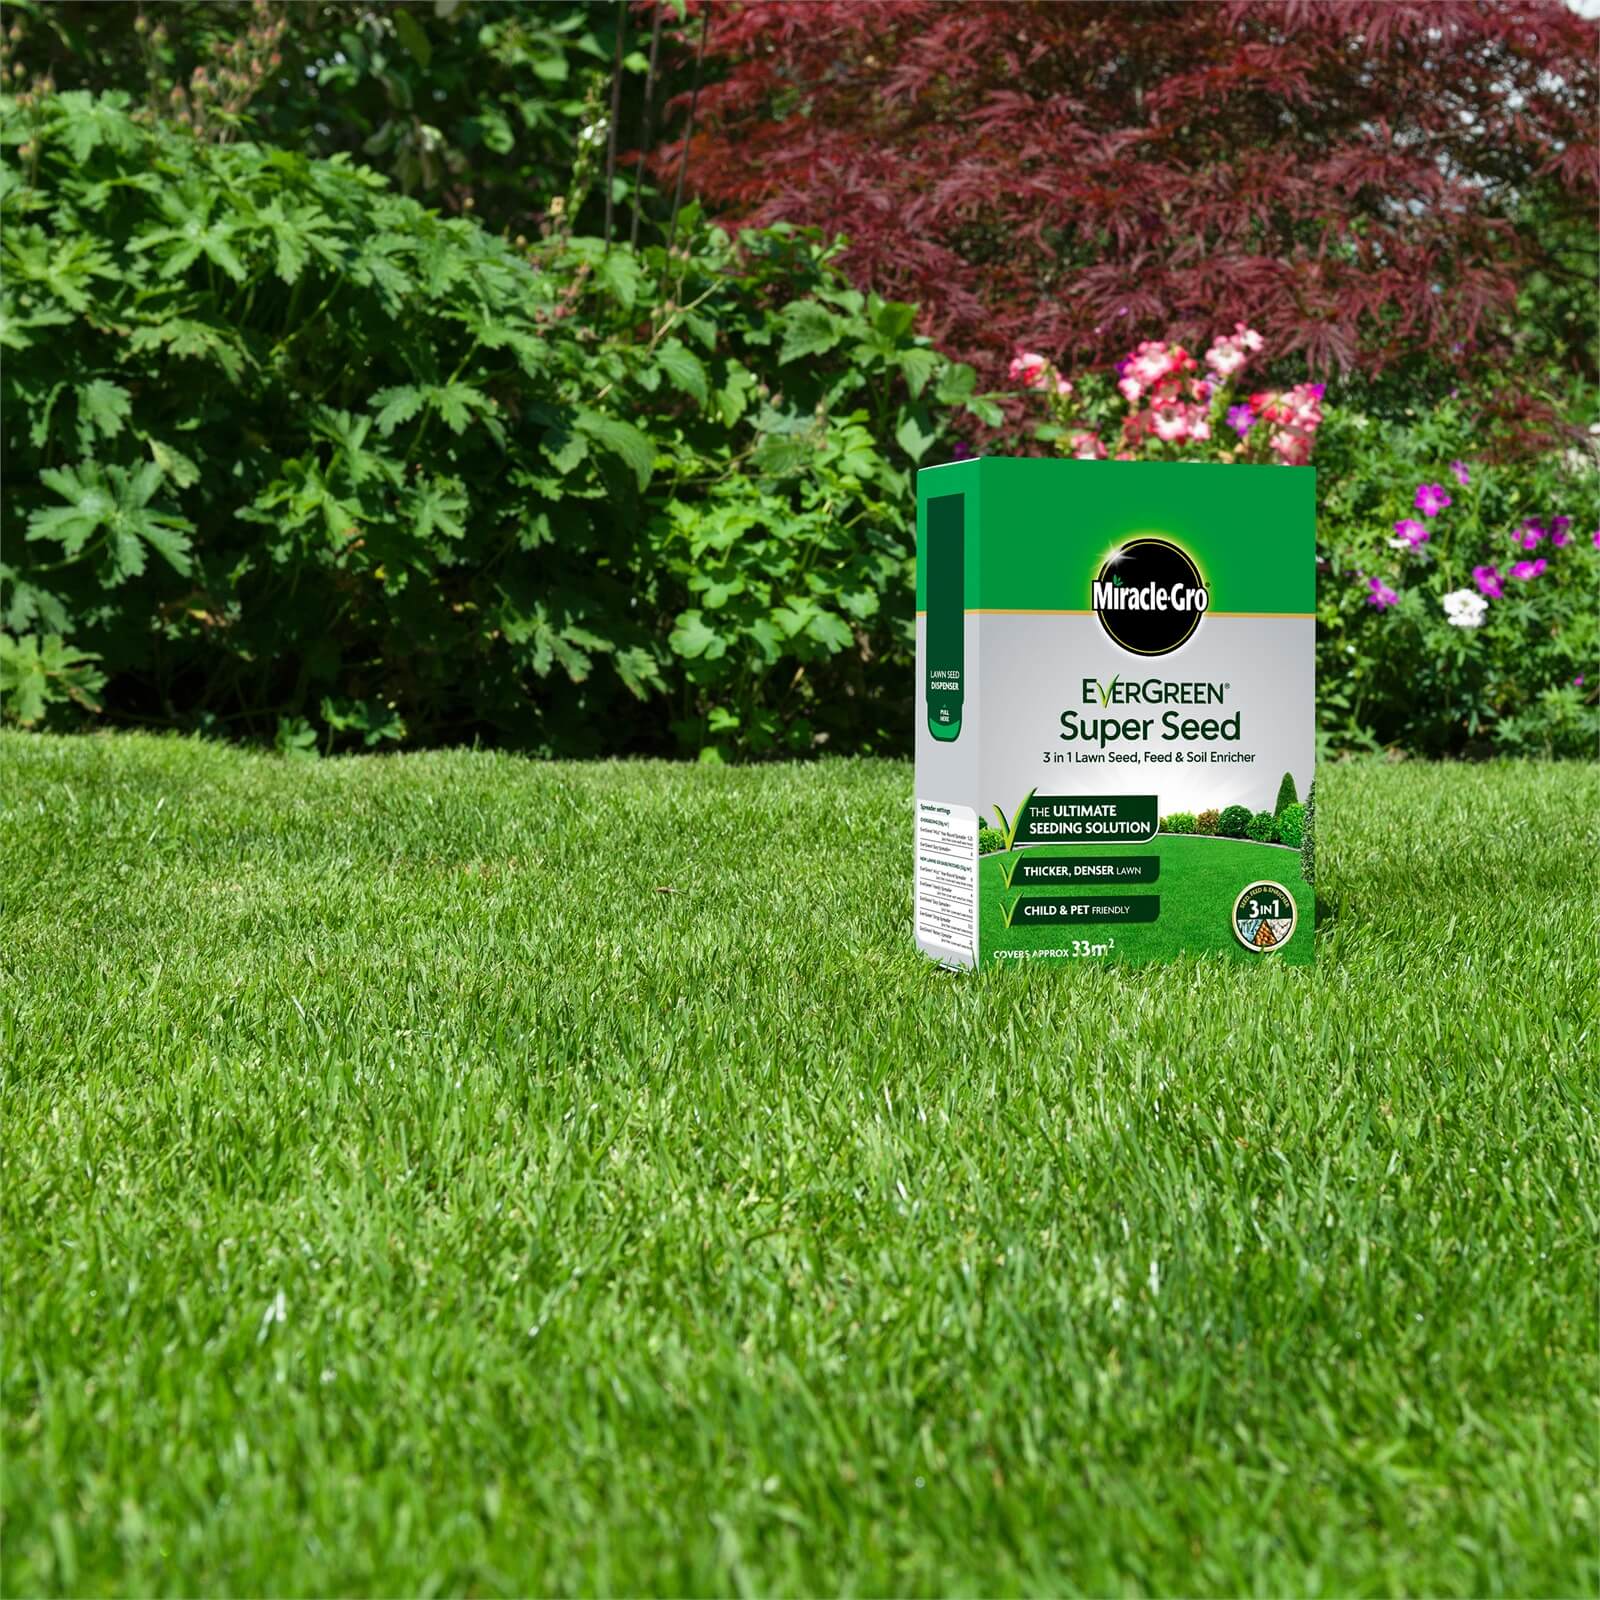 Miracle-Gro EverGreen Super Seed Lawn Seed - 33sq.m